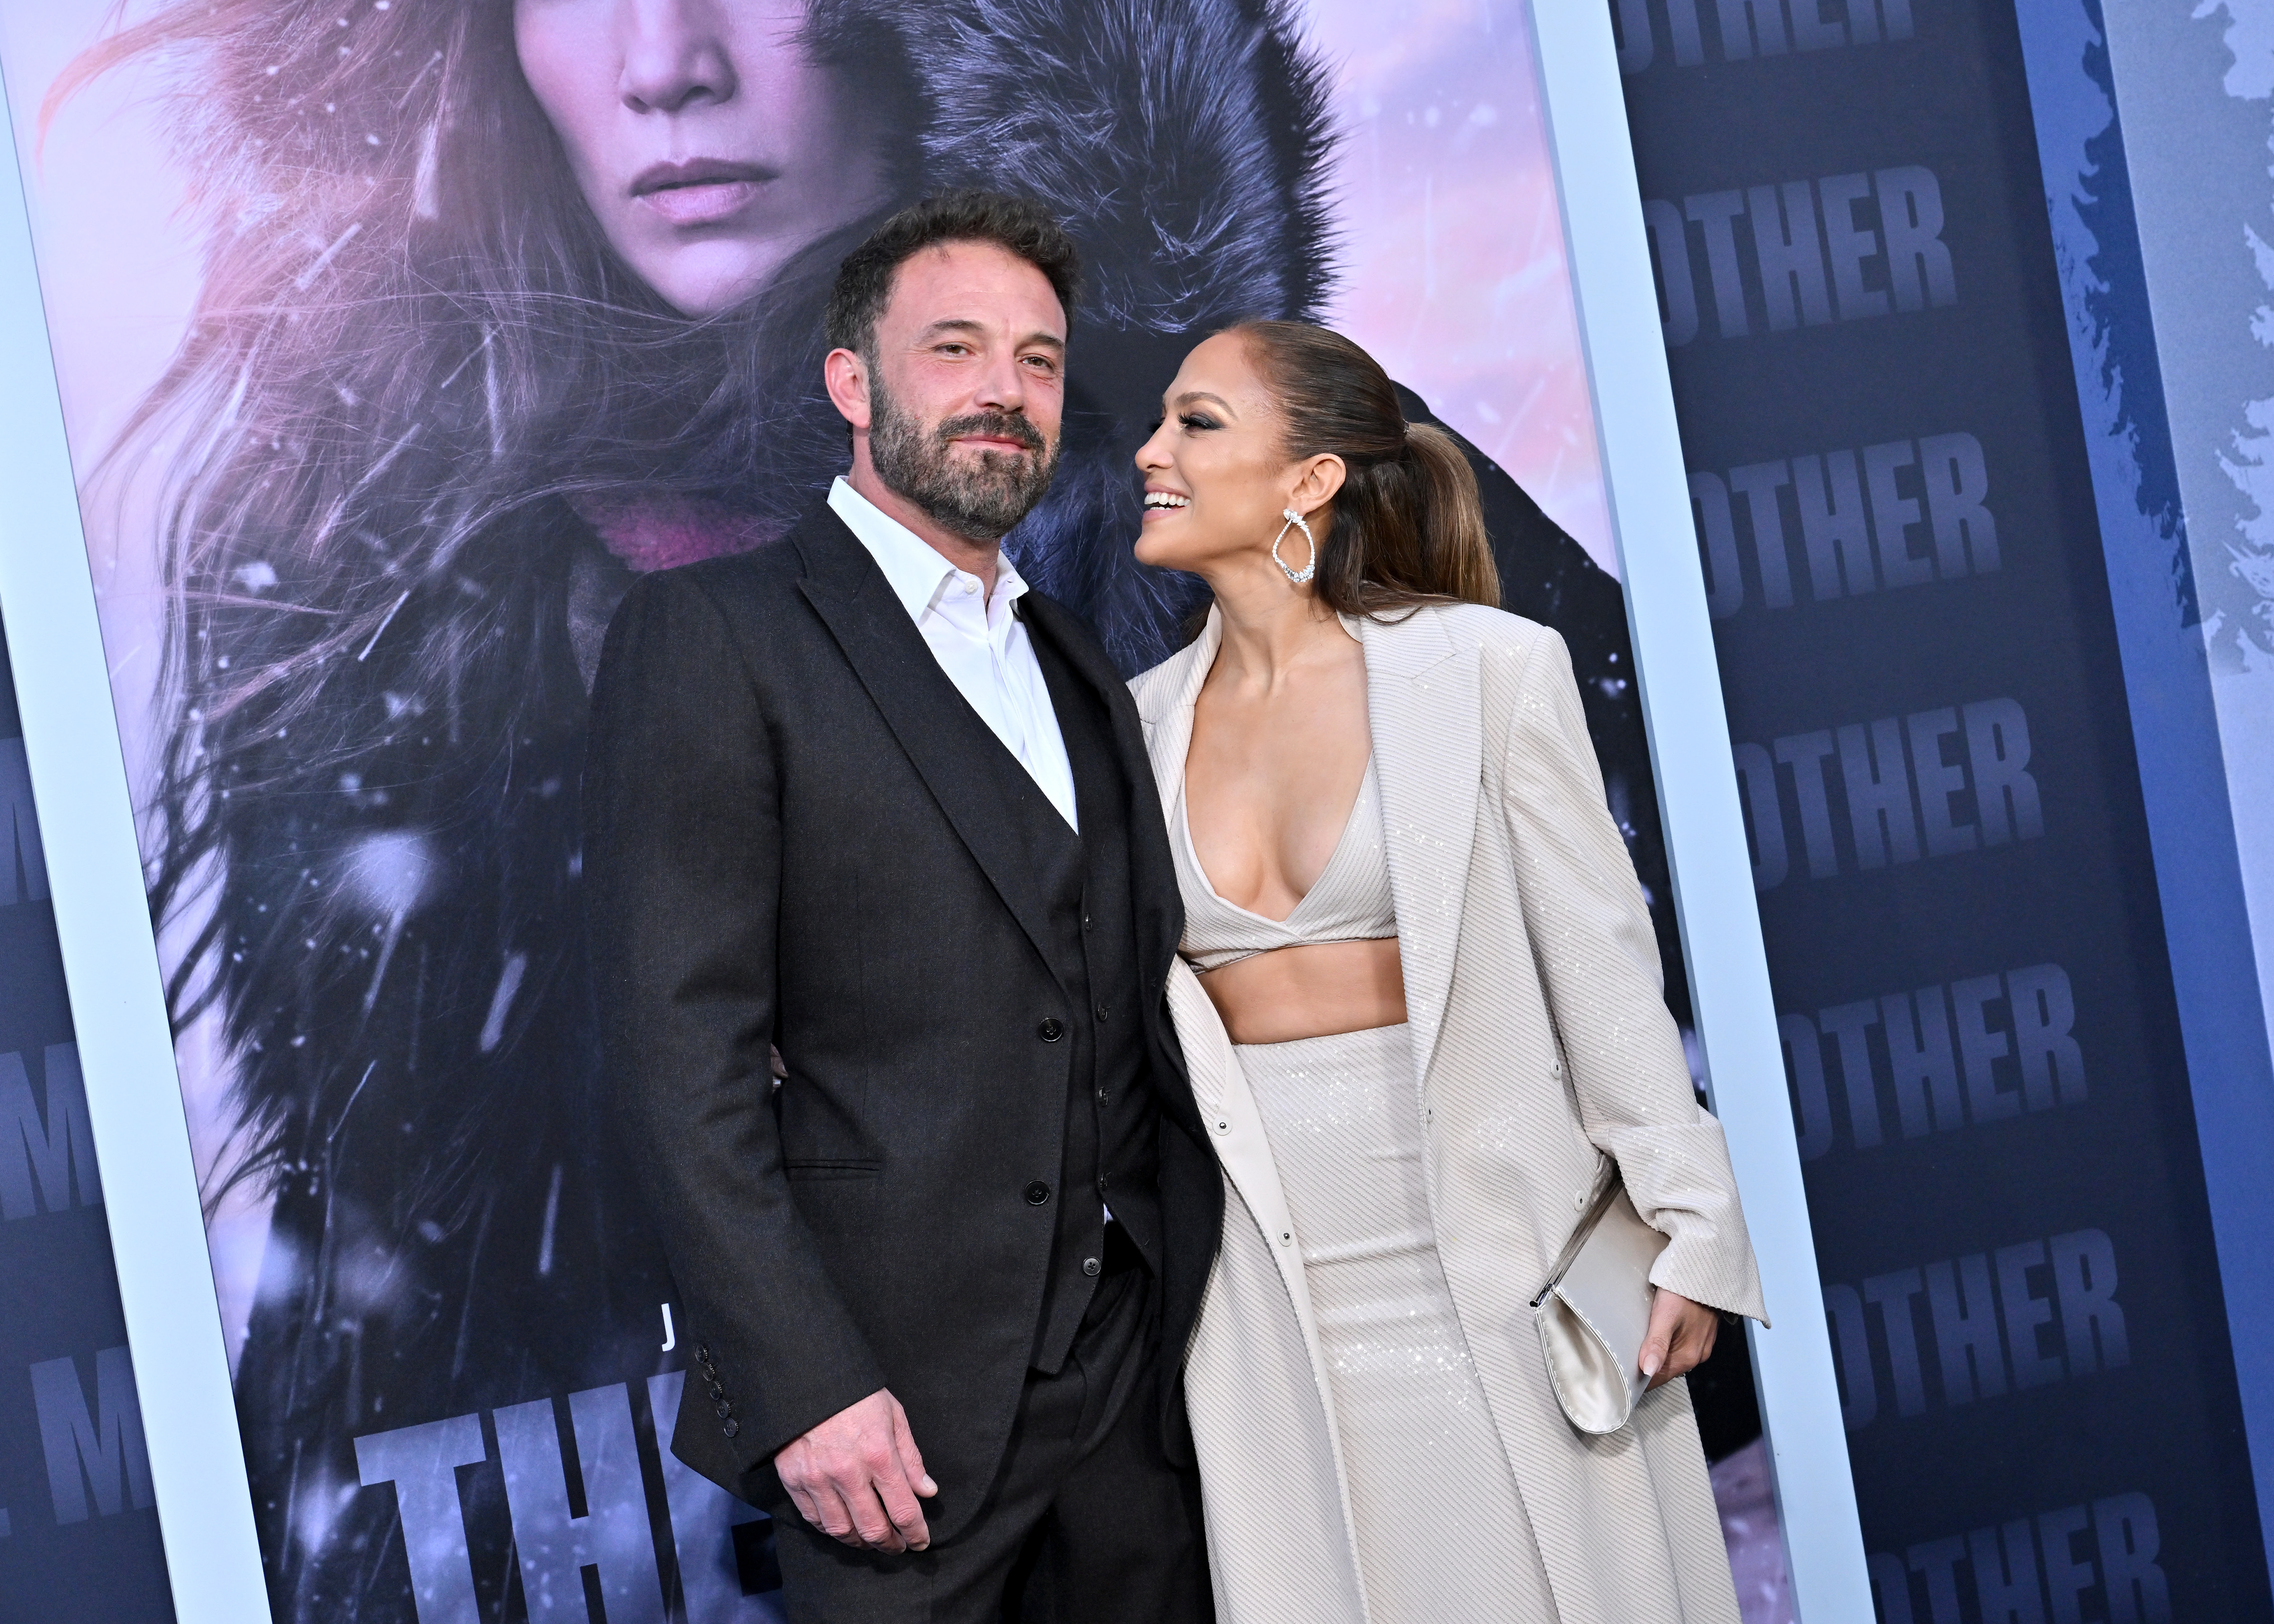 Ben Affleck and Jennifer Lopez at the premiere of Netflix's "The Mother" in Los Angeles, California on May 10, 2023 | Source: Getty Images